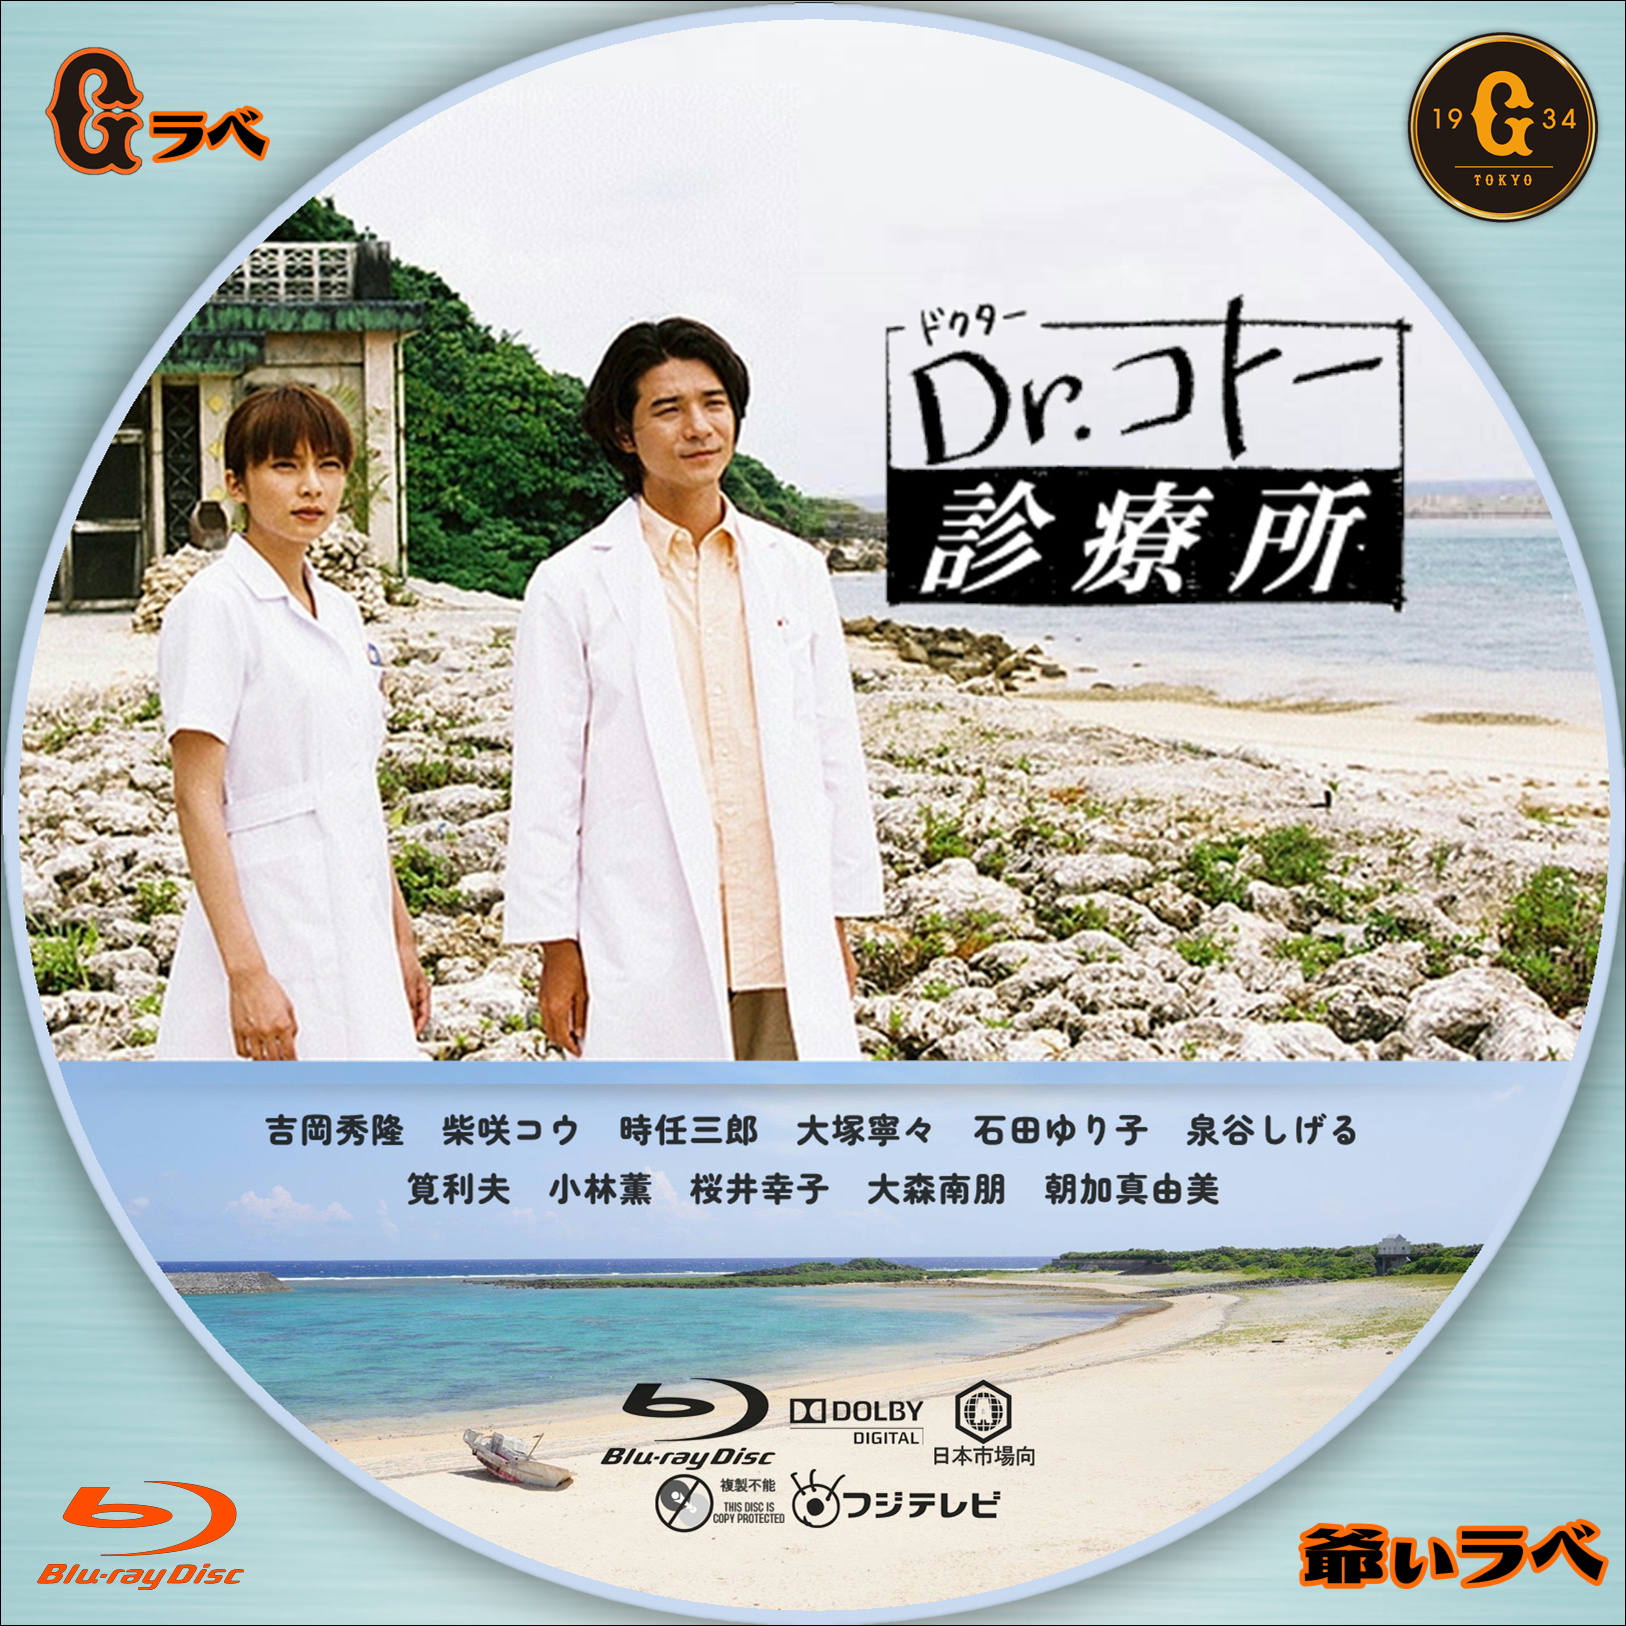 Dr コトー診療所 2003（Blu-ray）